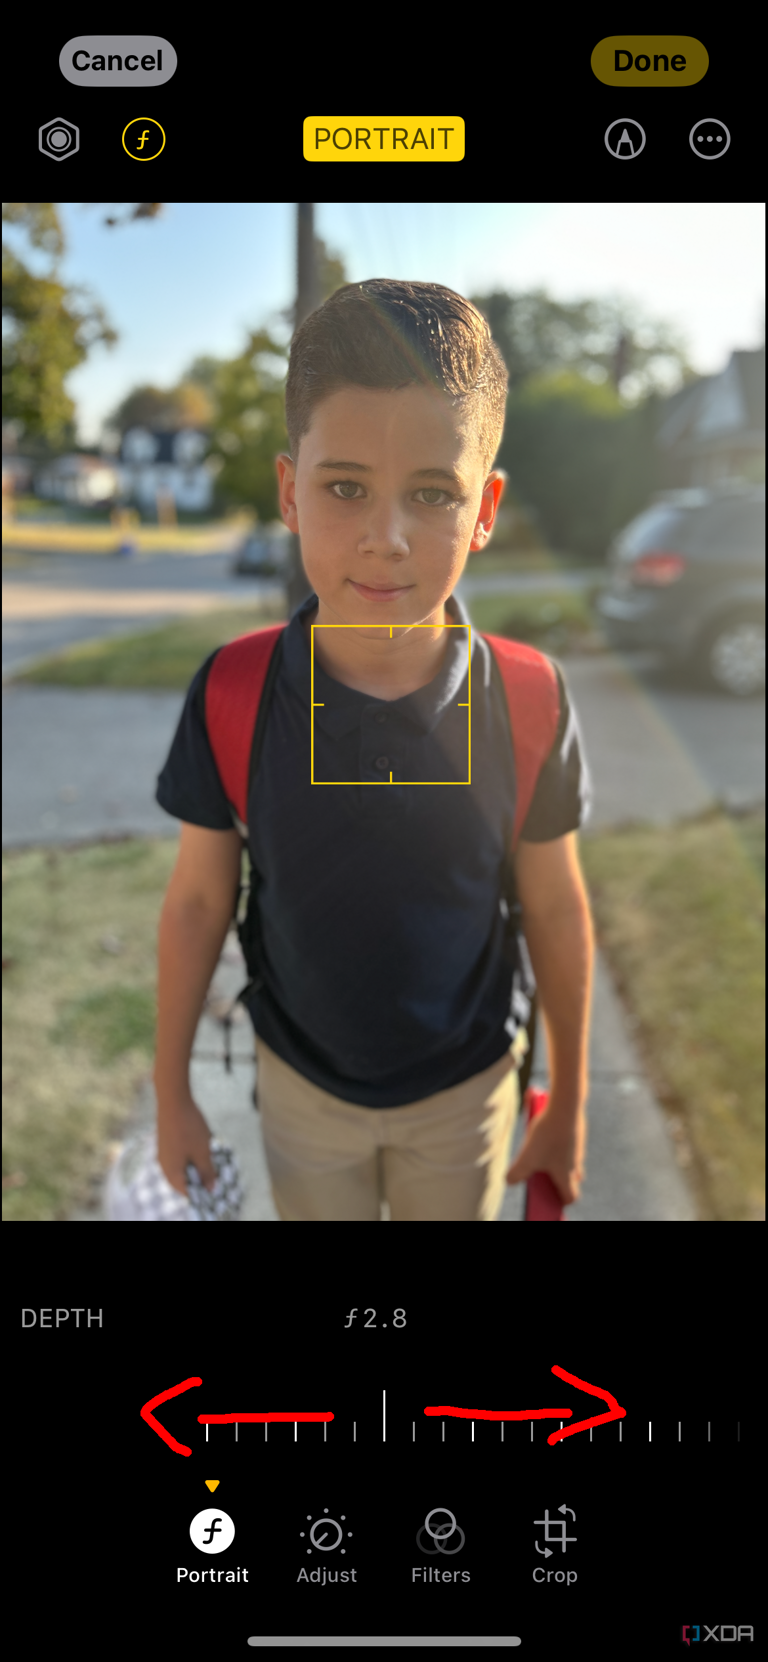 iPhone Photo library with a portrait photo of a young boy and depth selected with arrows pointing left and right on the slider.